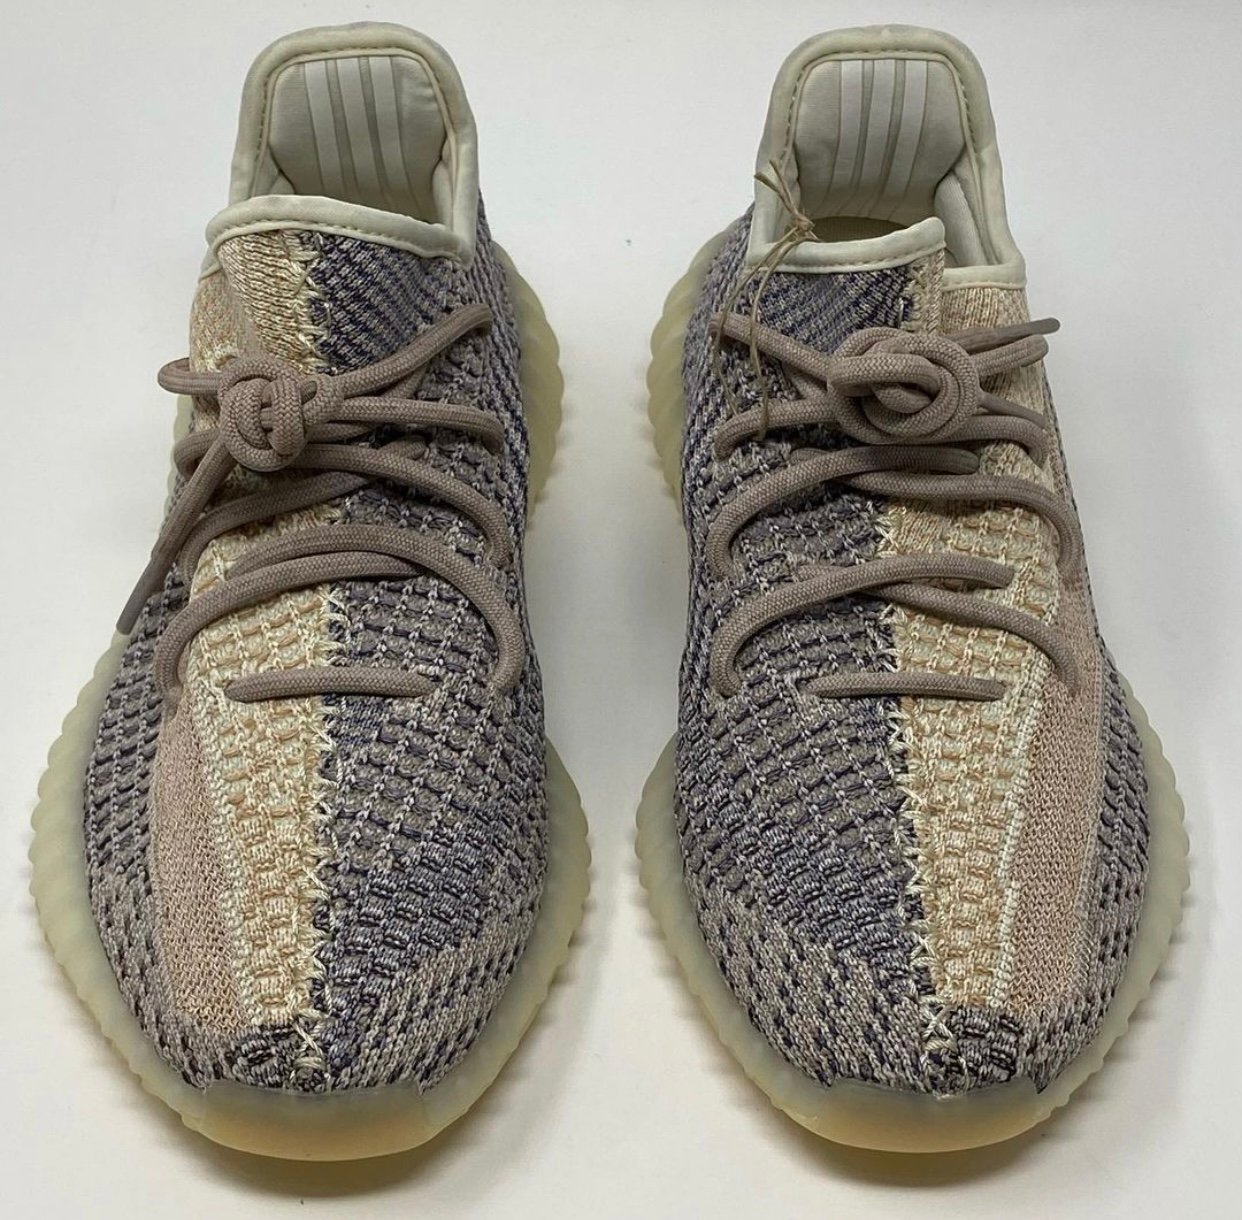 adidas yeezy boost 350 v2 ash pearl GY7658 release info 4